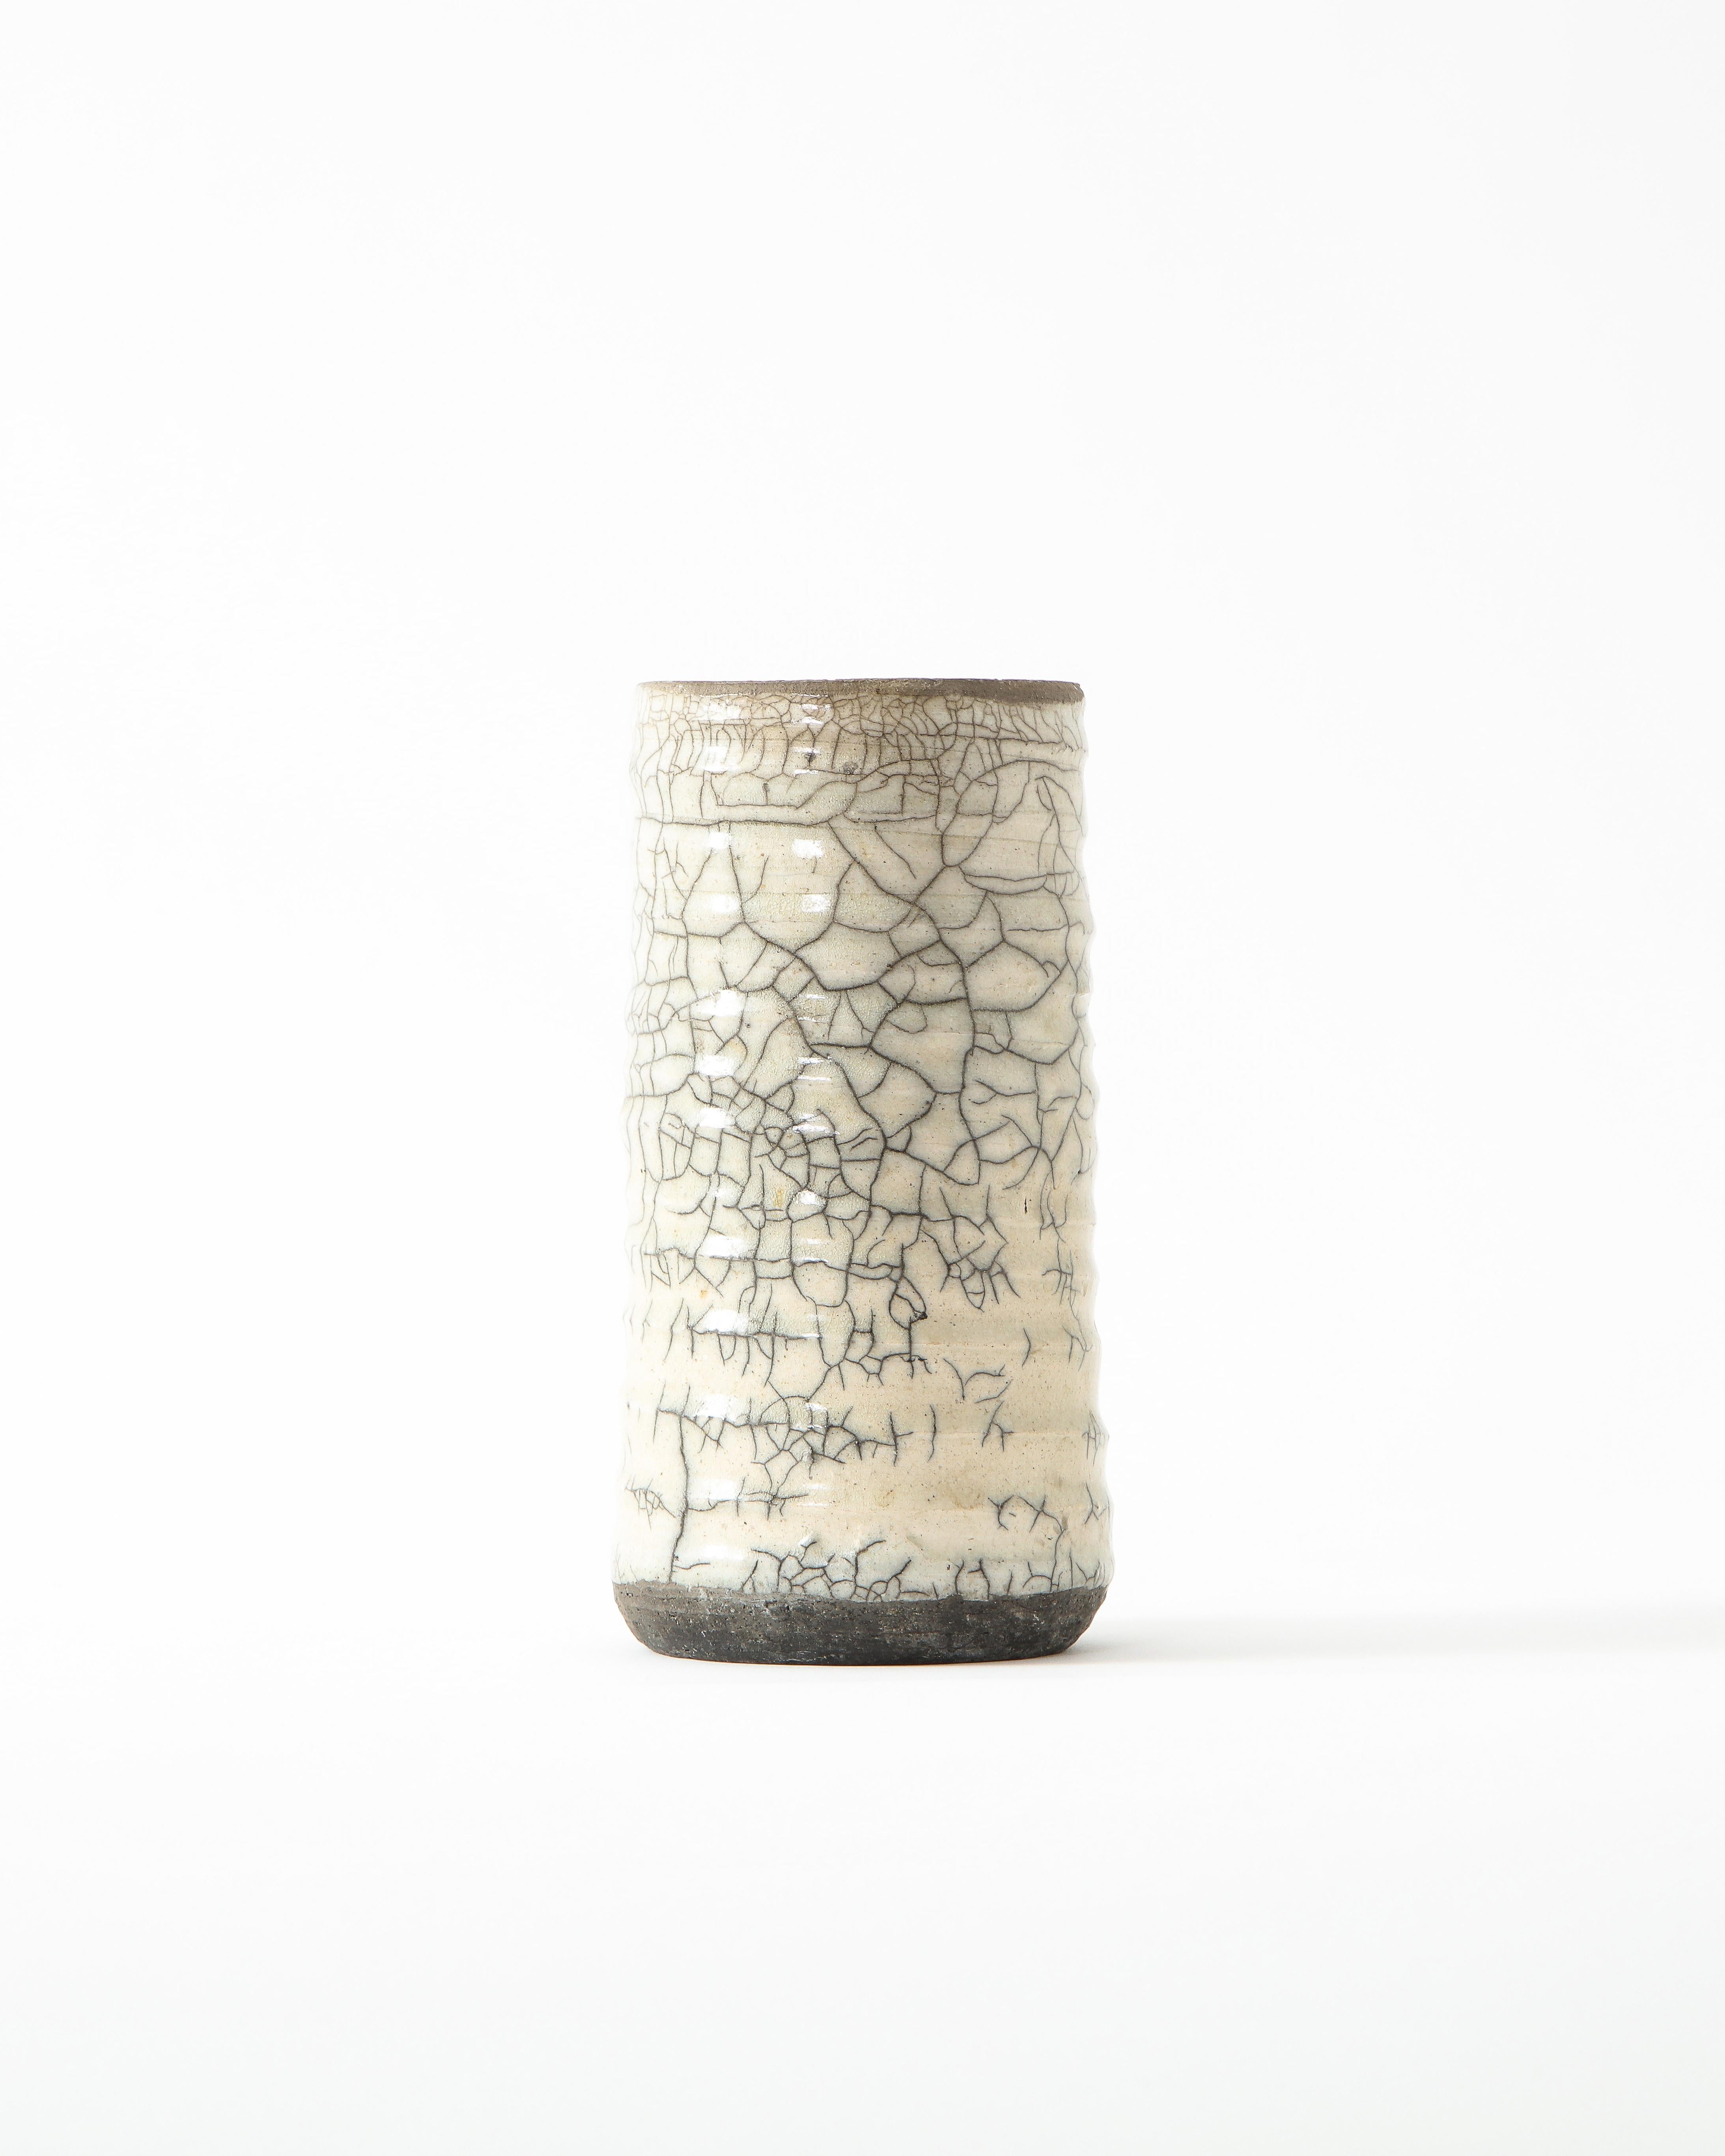 Off-White Ceramic Vase with Intricate Crackling 2